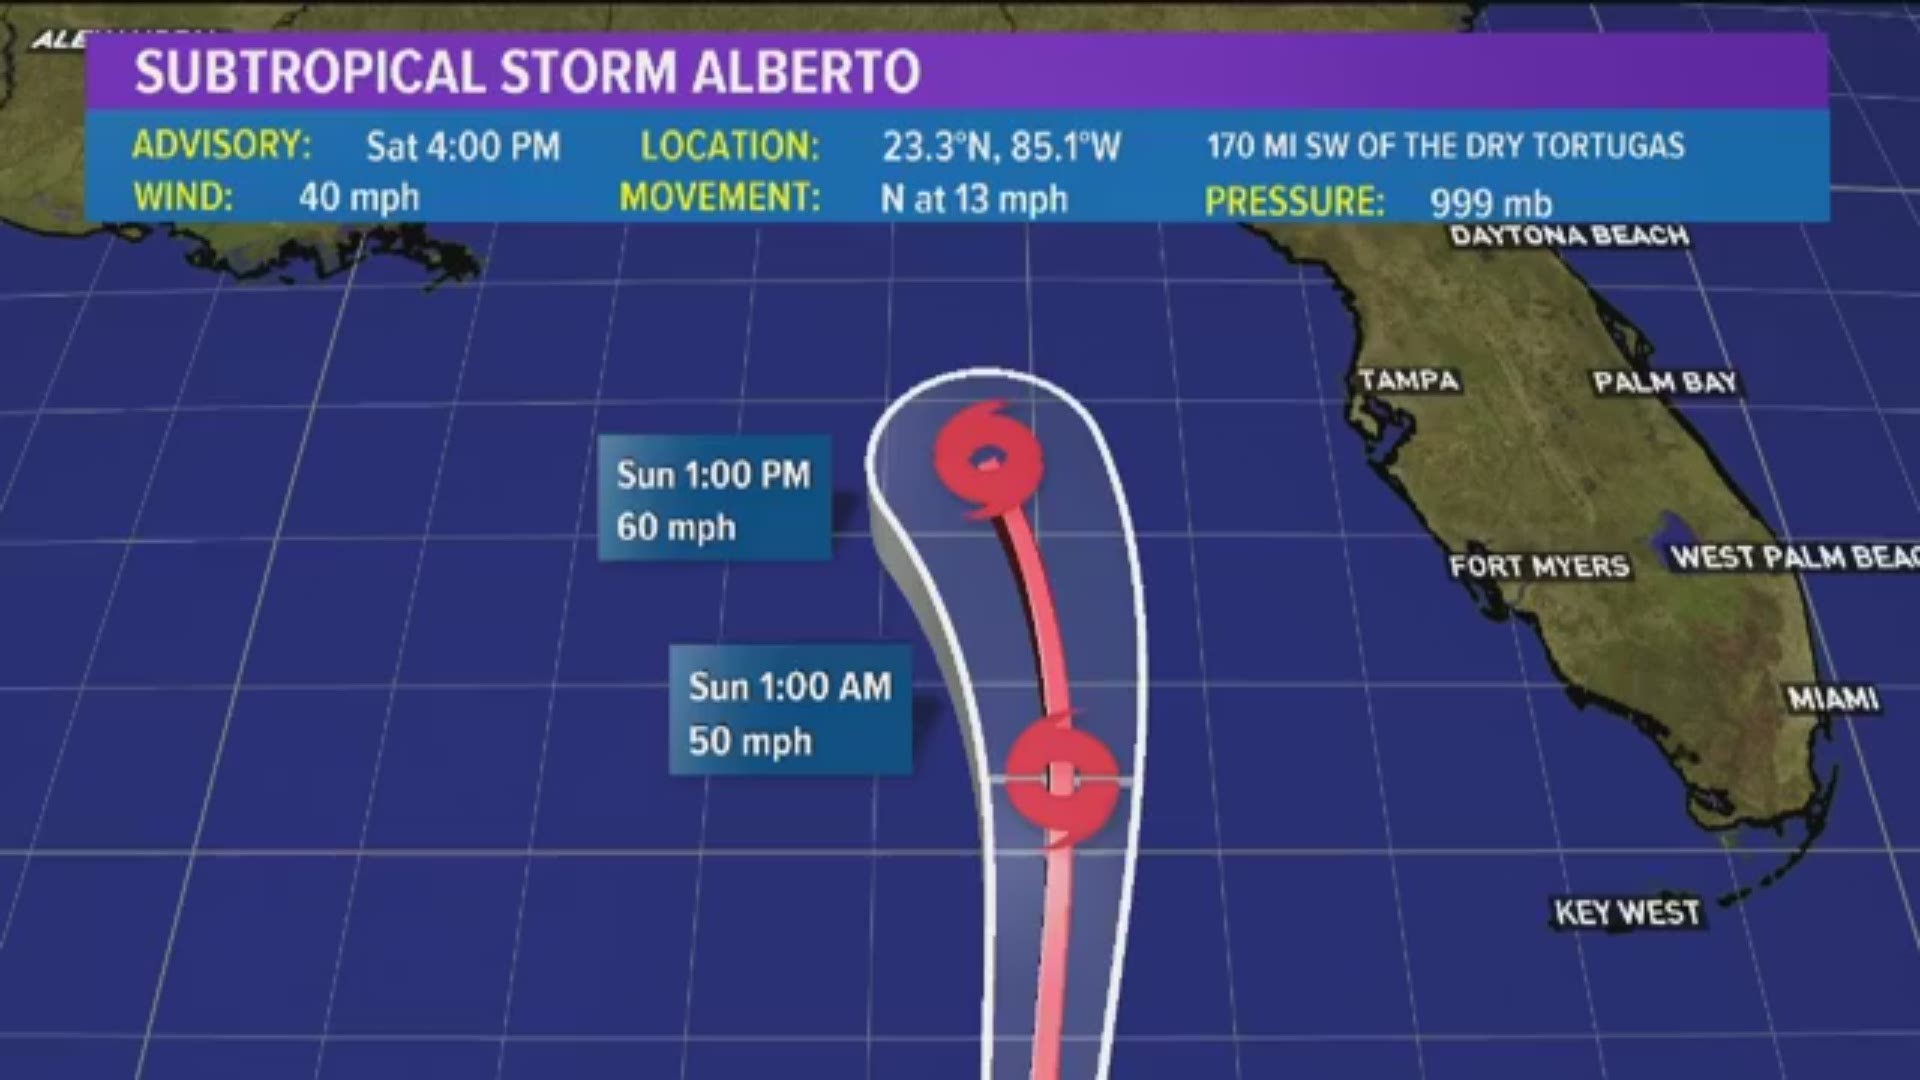 Subtropical Storm Alberto continues to shift east. The New Orleans area is currently out of the cone of uncertainty.